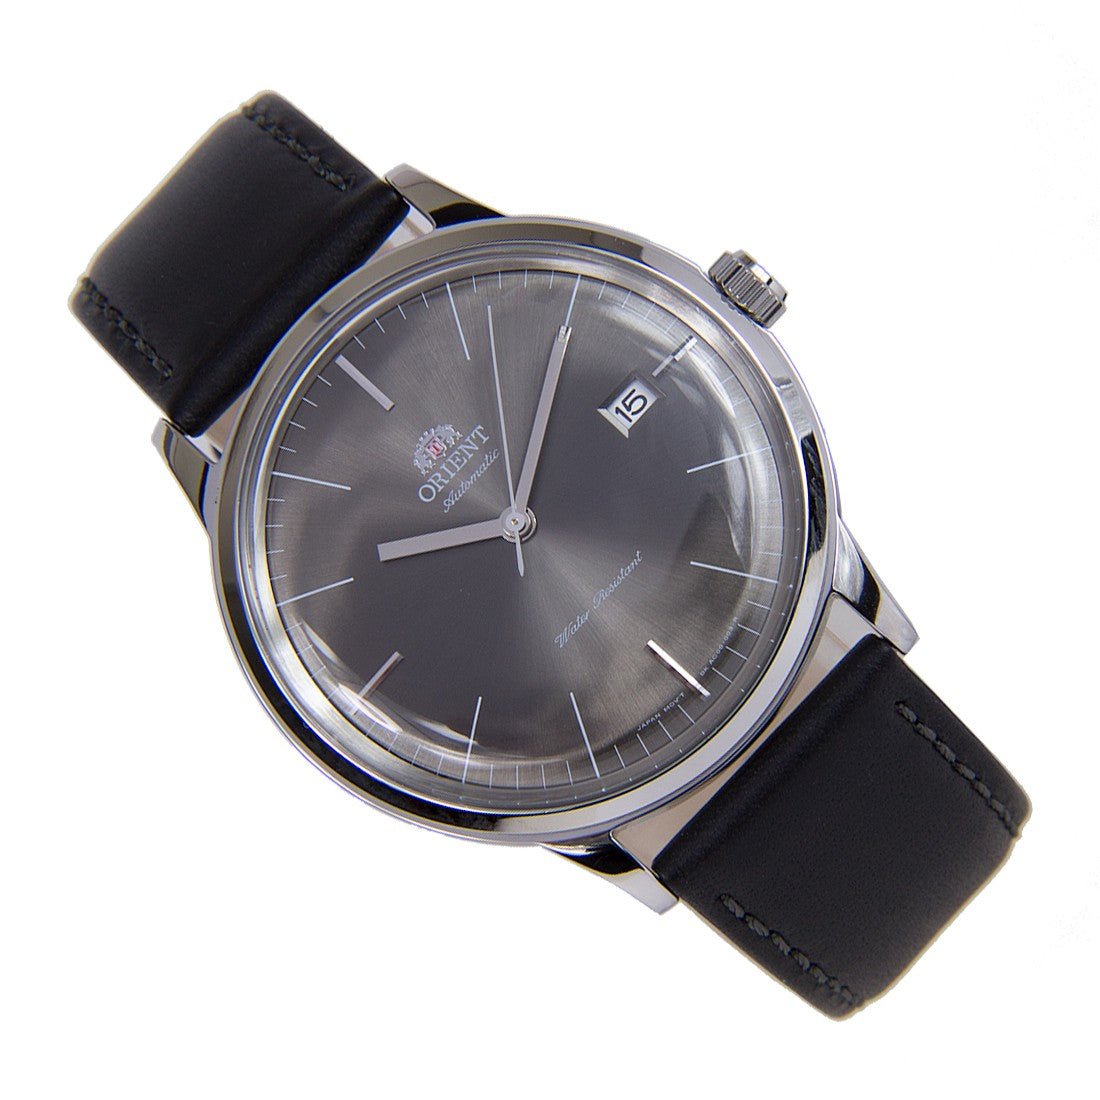 Orient Classic Bambino Mechanical FAC0000CA0 AC0000CA Leather Watch -Orient